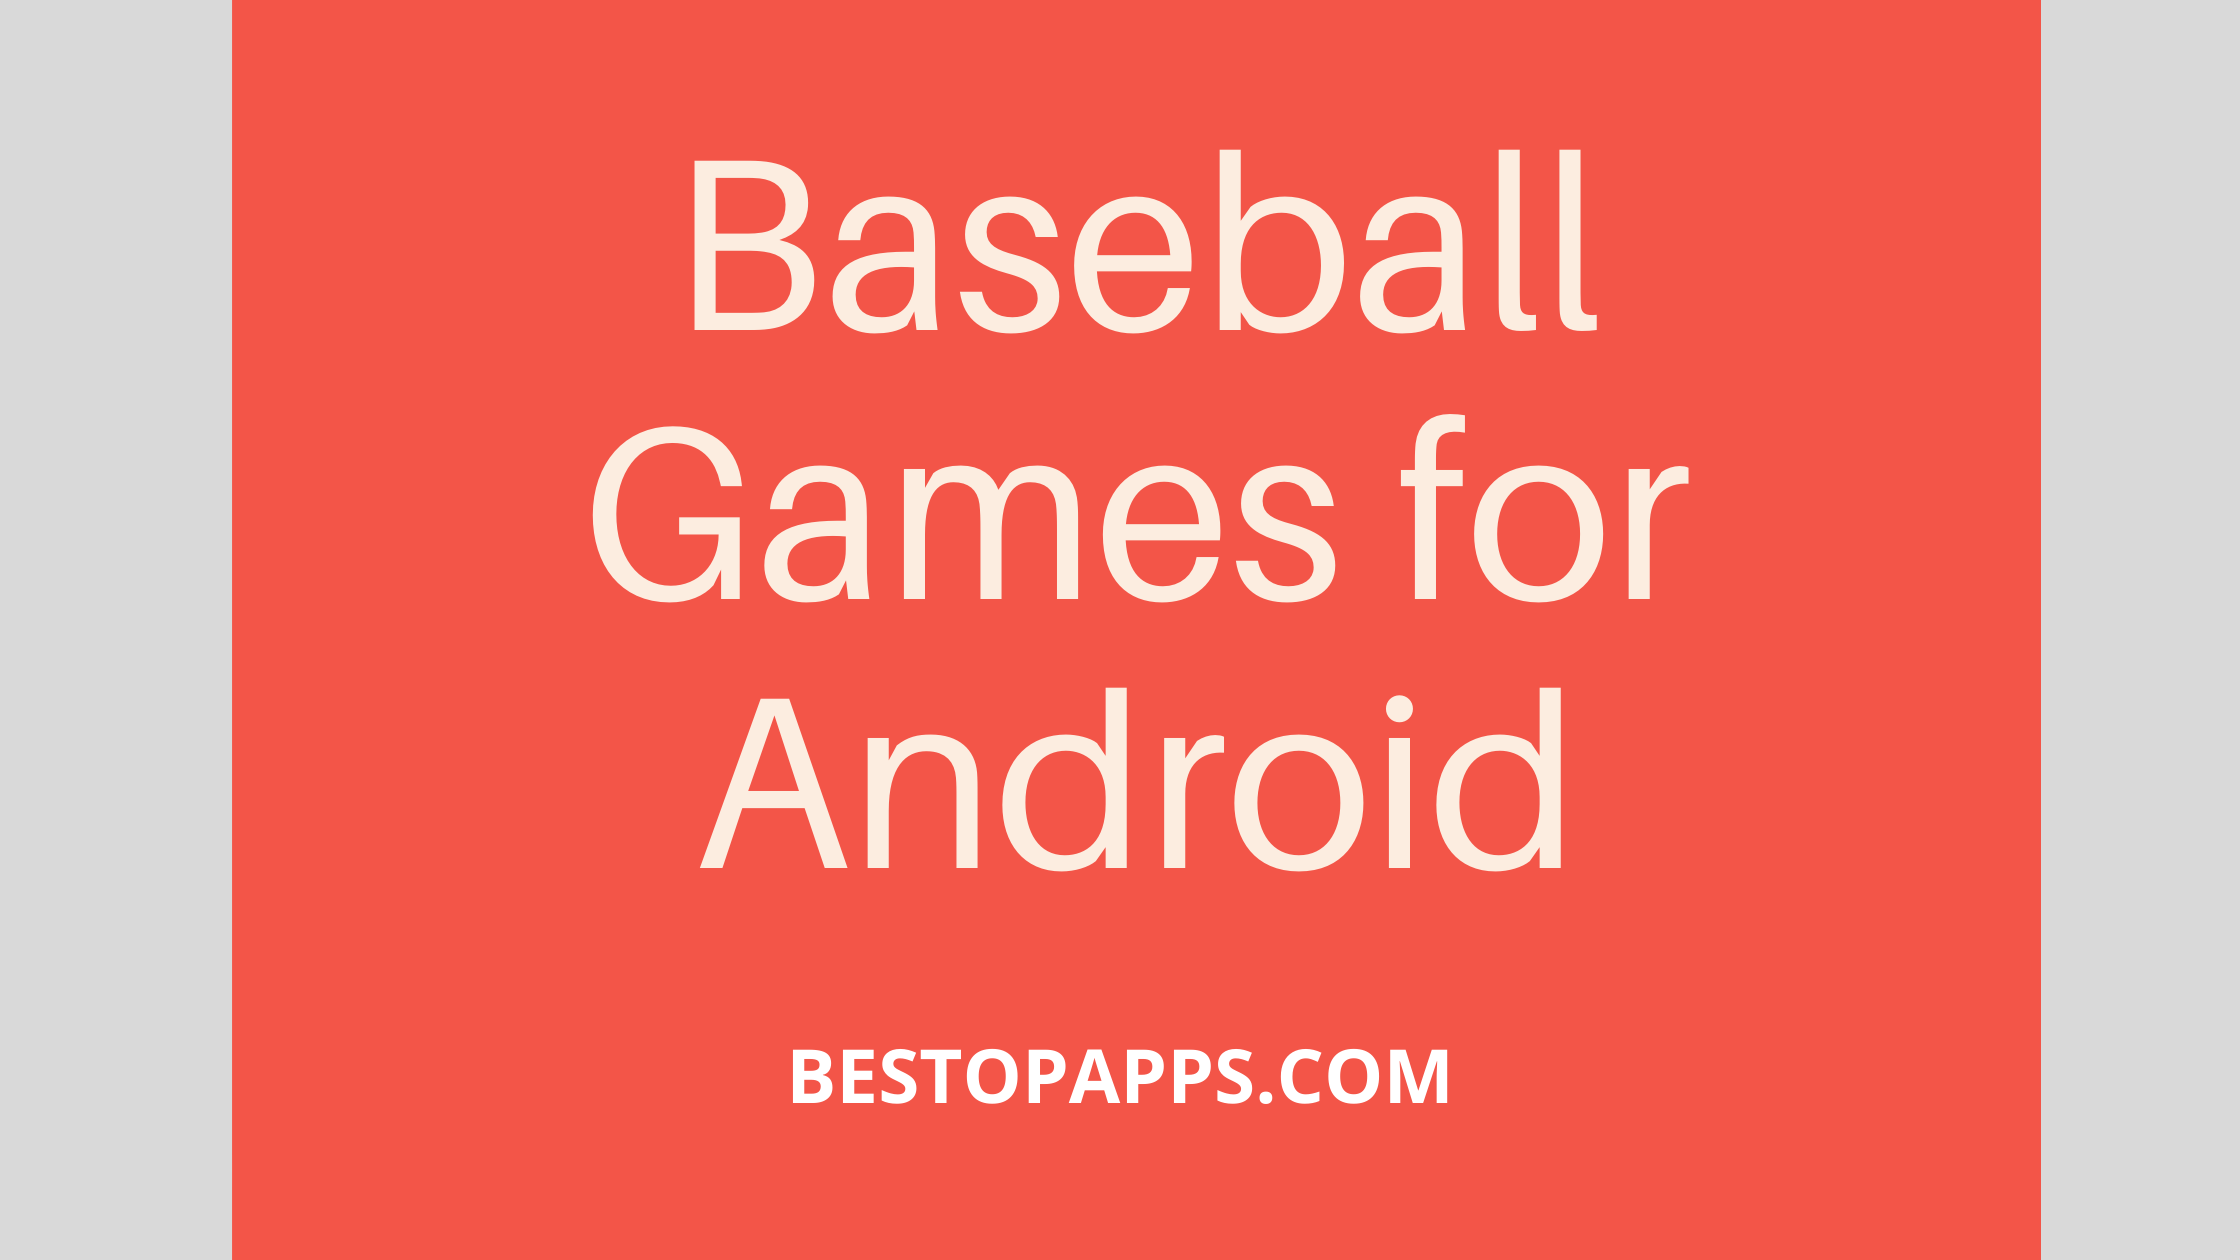 Baseball Games for Android